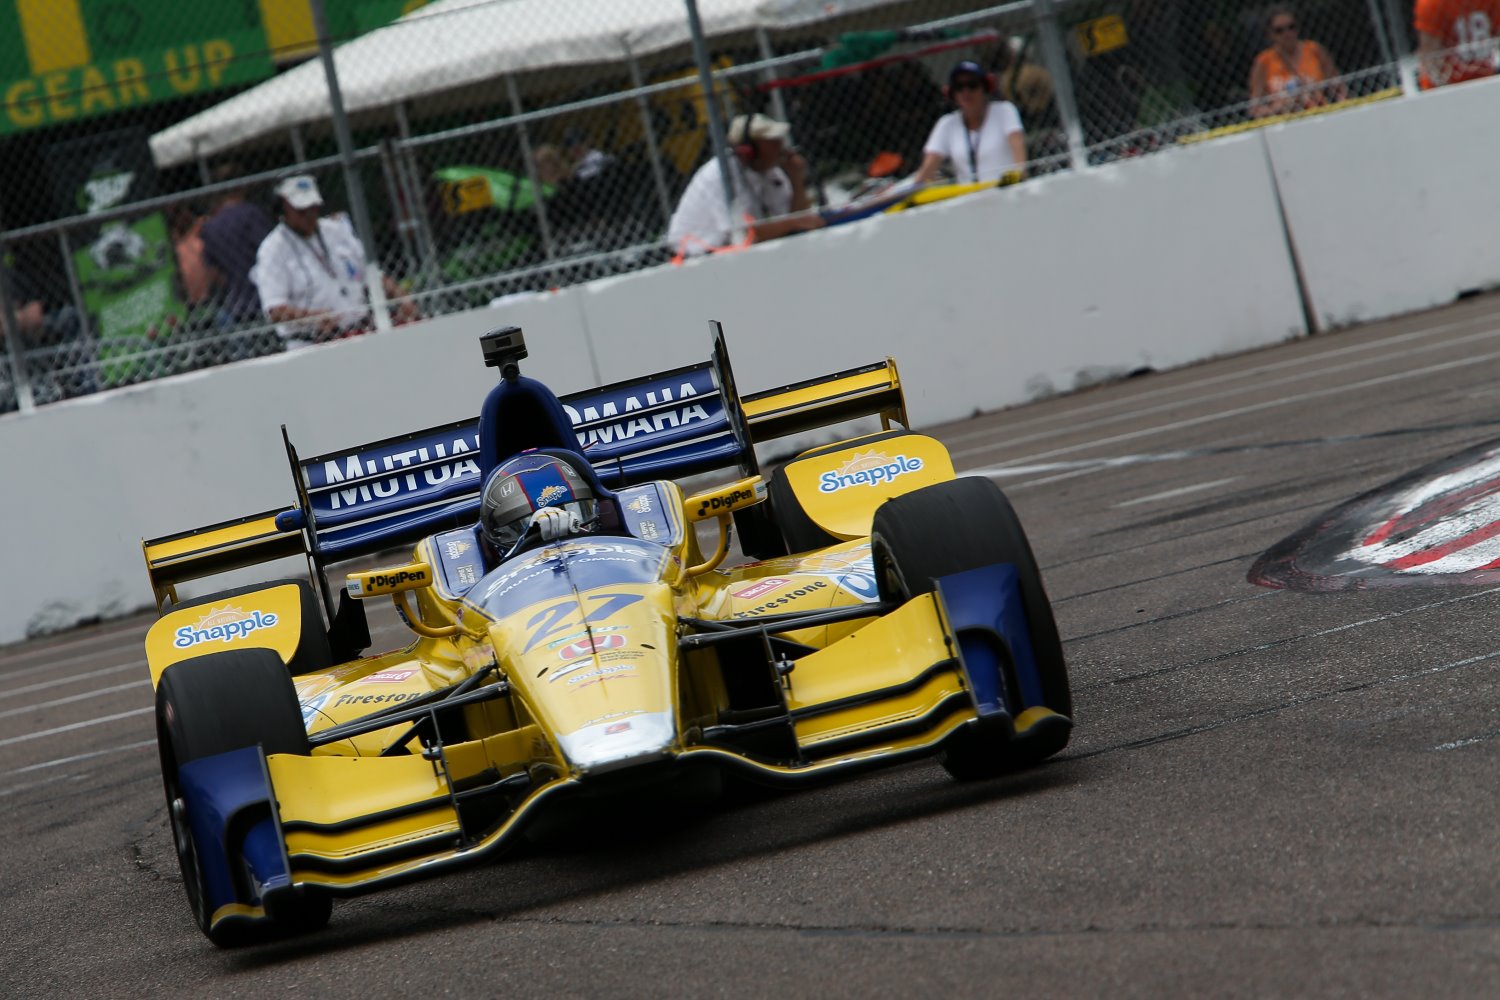 Marco Andretti was moving through the field until he spun